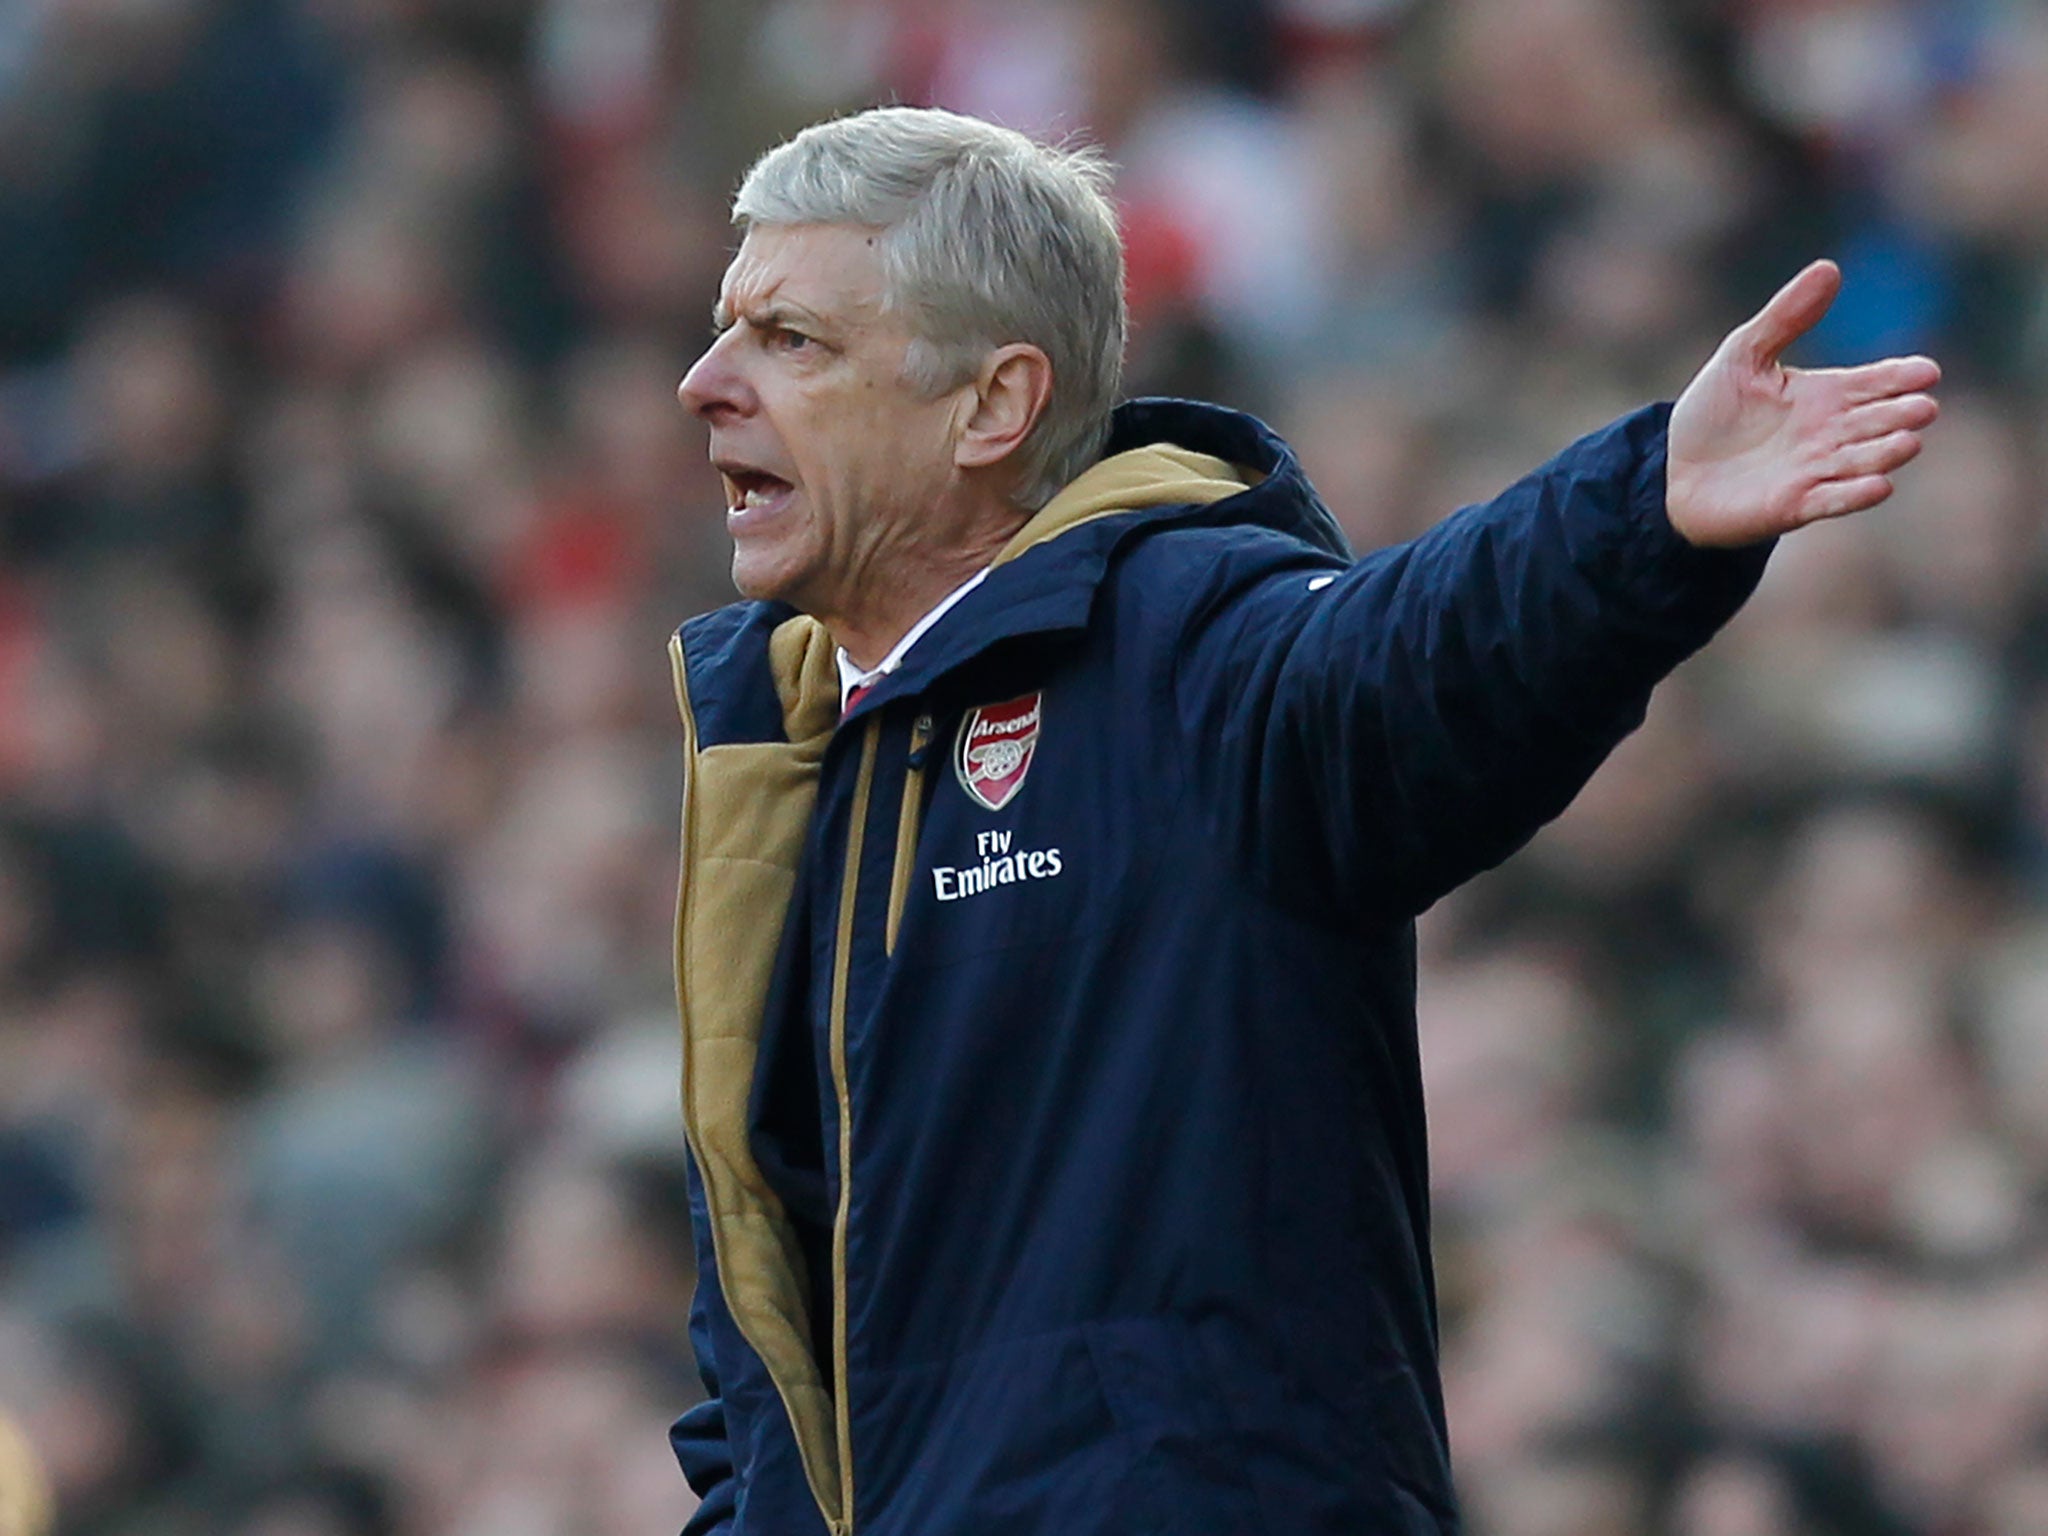 Arsène Wenger shows his frustration during Arsenal’s FA Cup defeat by Watford on Sunday